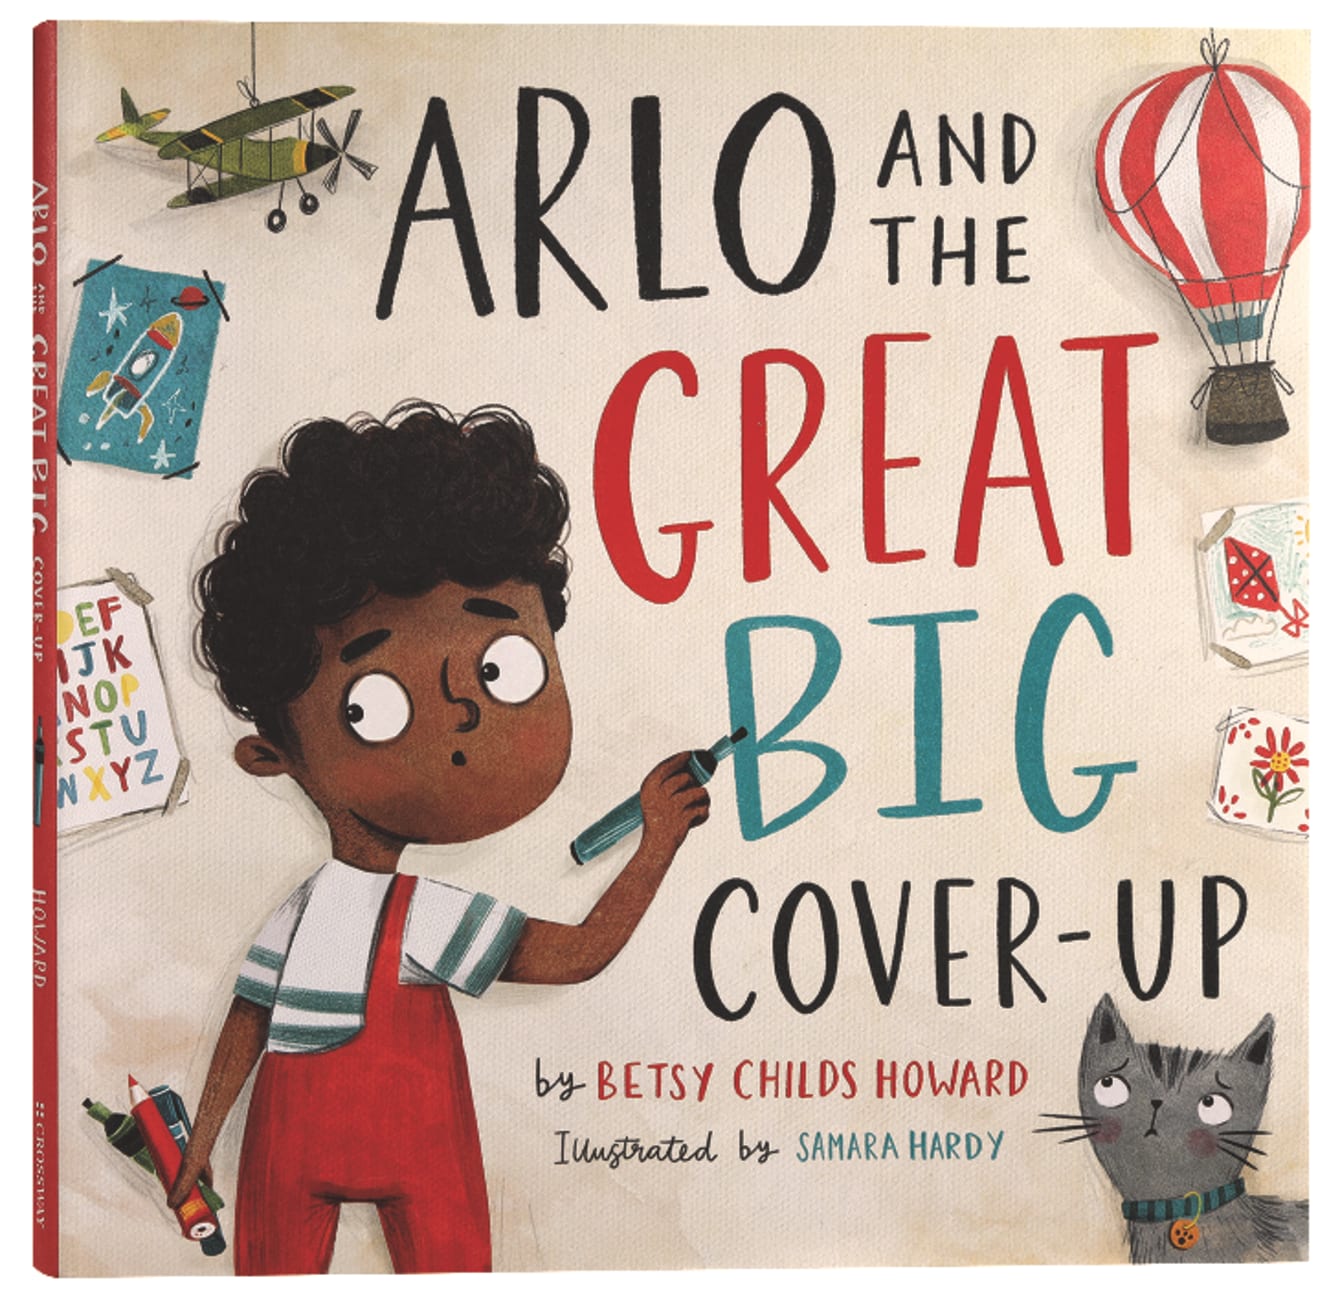 Arlo and the Great Big Cover-Up (A Tcg Children's Book (The Gospel Coalition) Series) Hardback